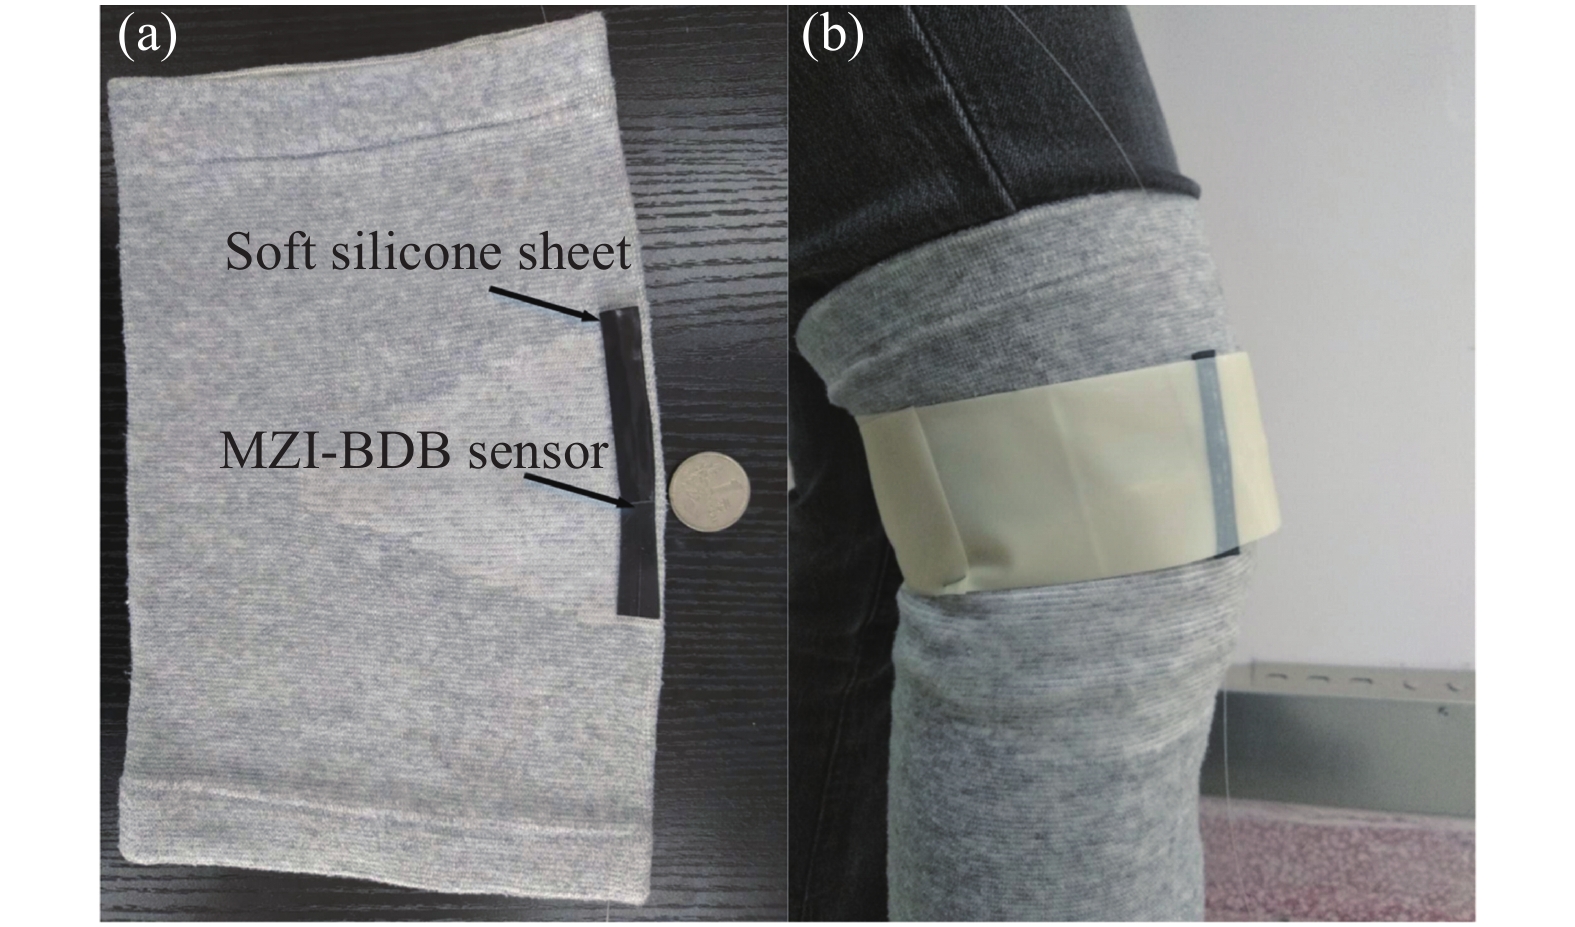 (a) Schematic diagram of sensor package; (b) Schematic diagram of sensor is encapsulated and fixed on the knee joint